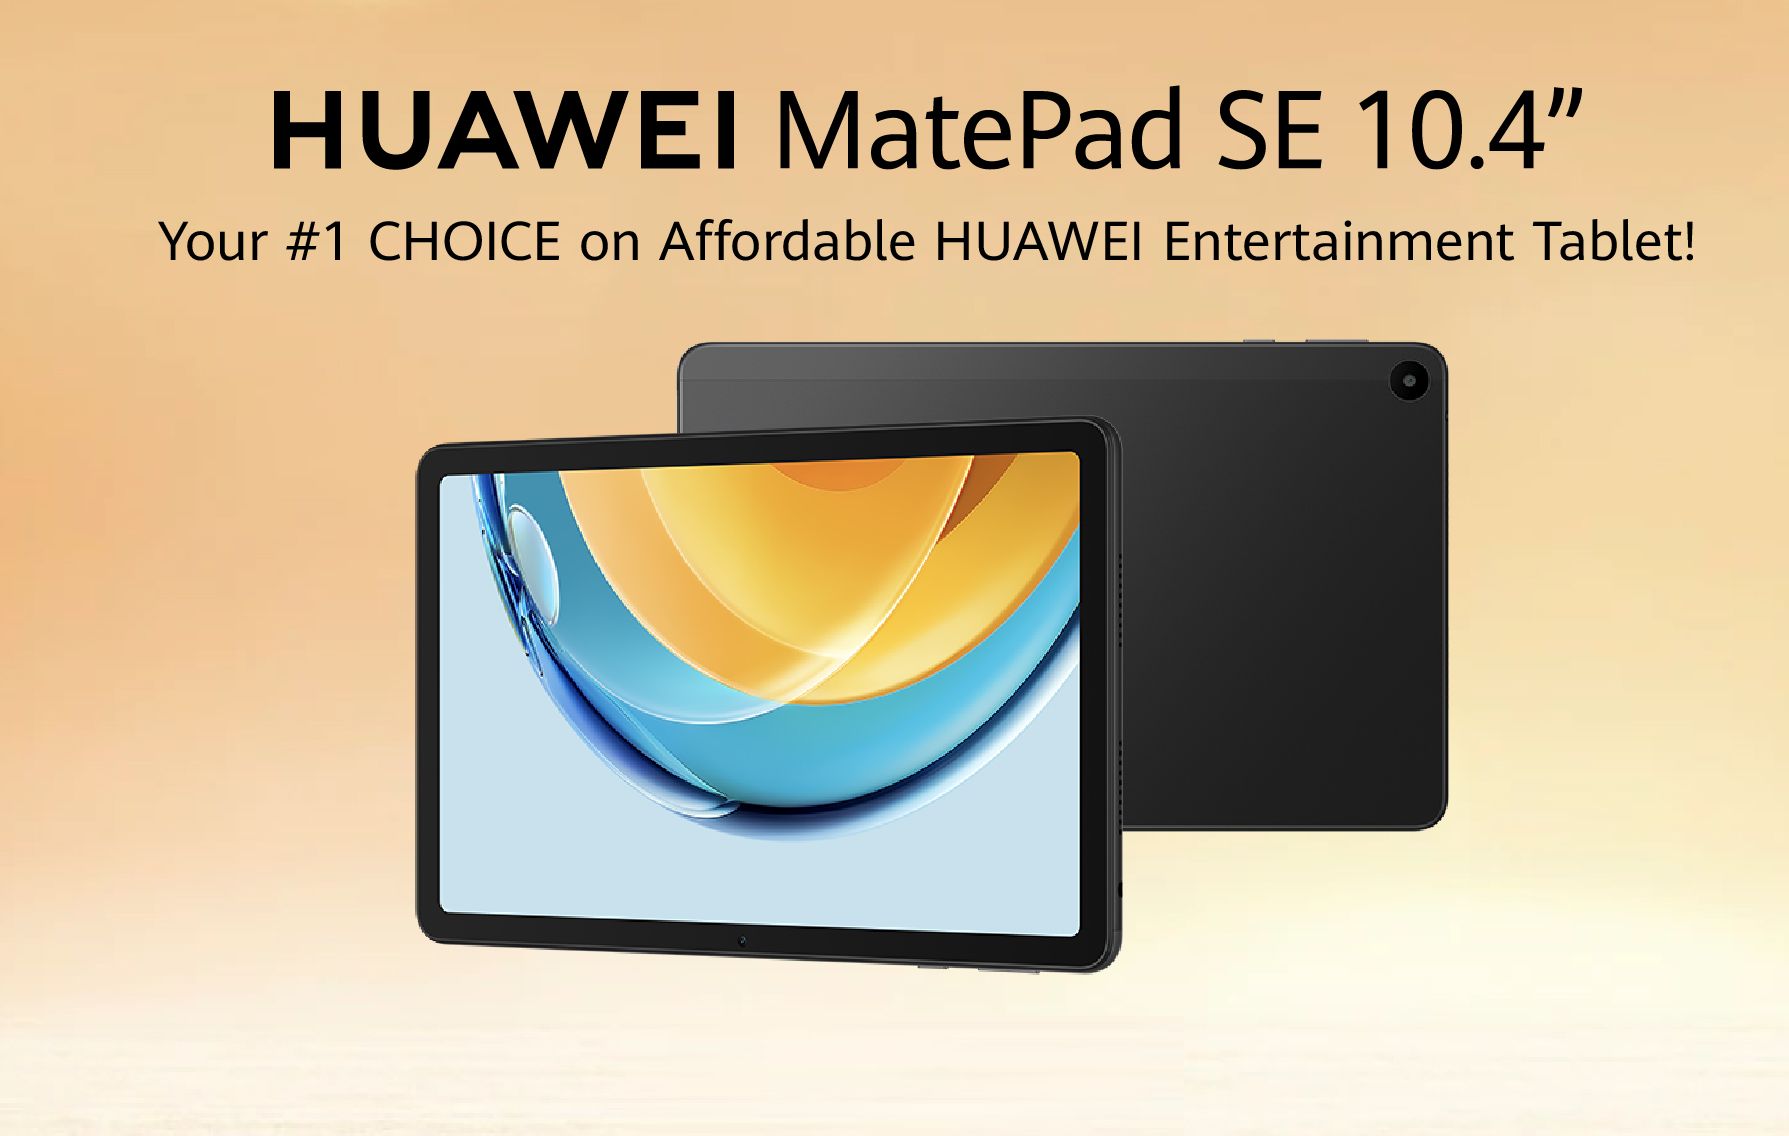 Huawei MatePad SE 10.4 tablet gets RM300 instant rebate for a limited time  in Malaysia - SoyaCincau